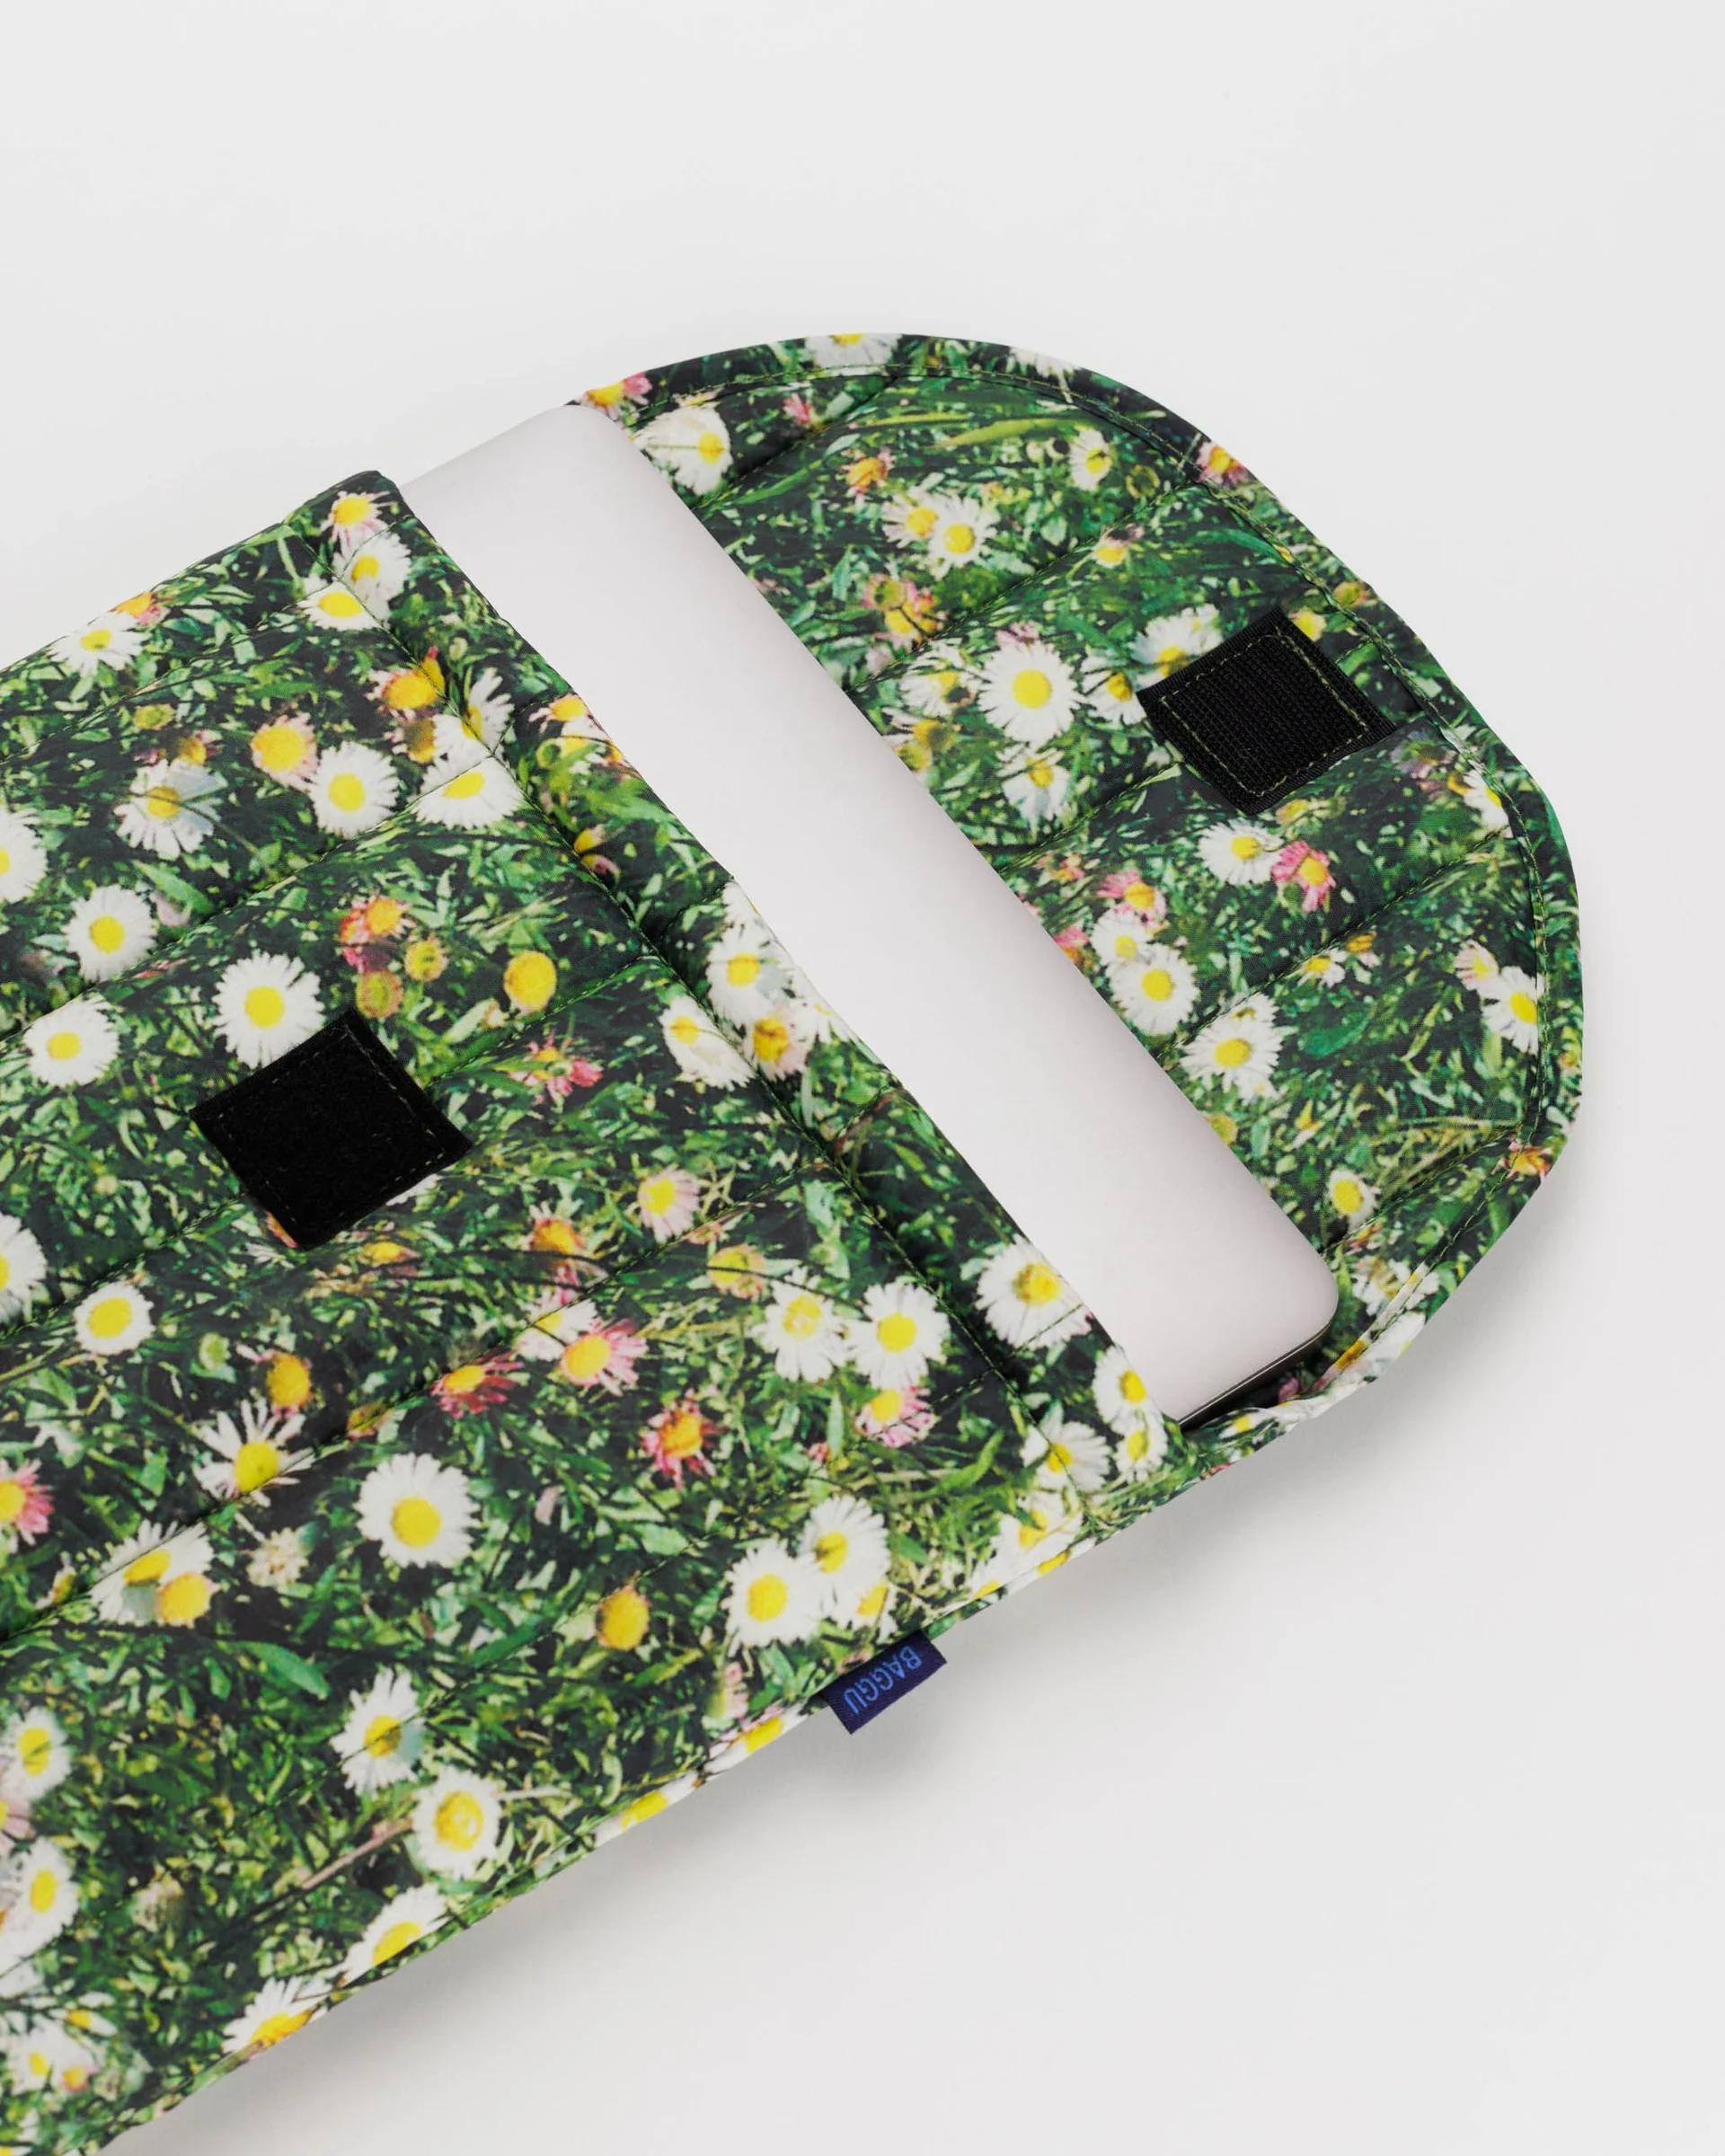 Laptop peeking out of lapto case. Floral/ grass details pop against white background. 